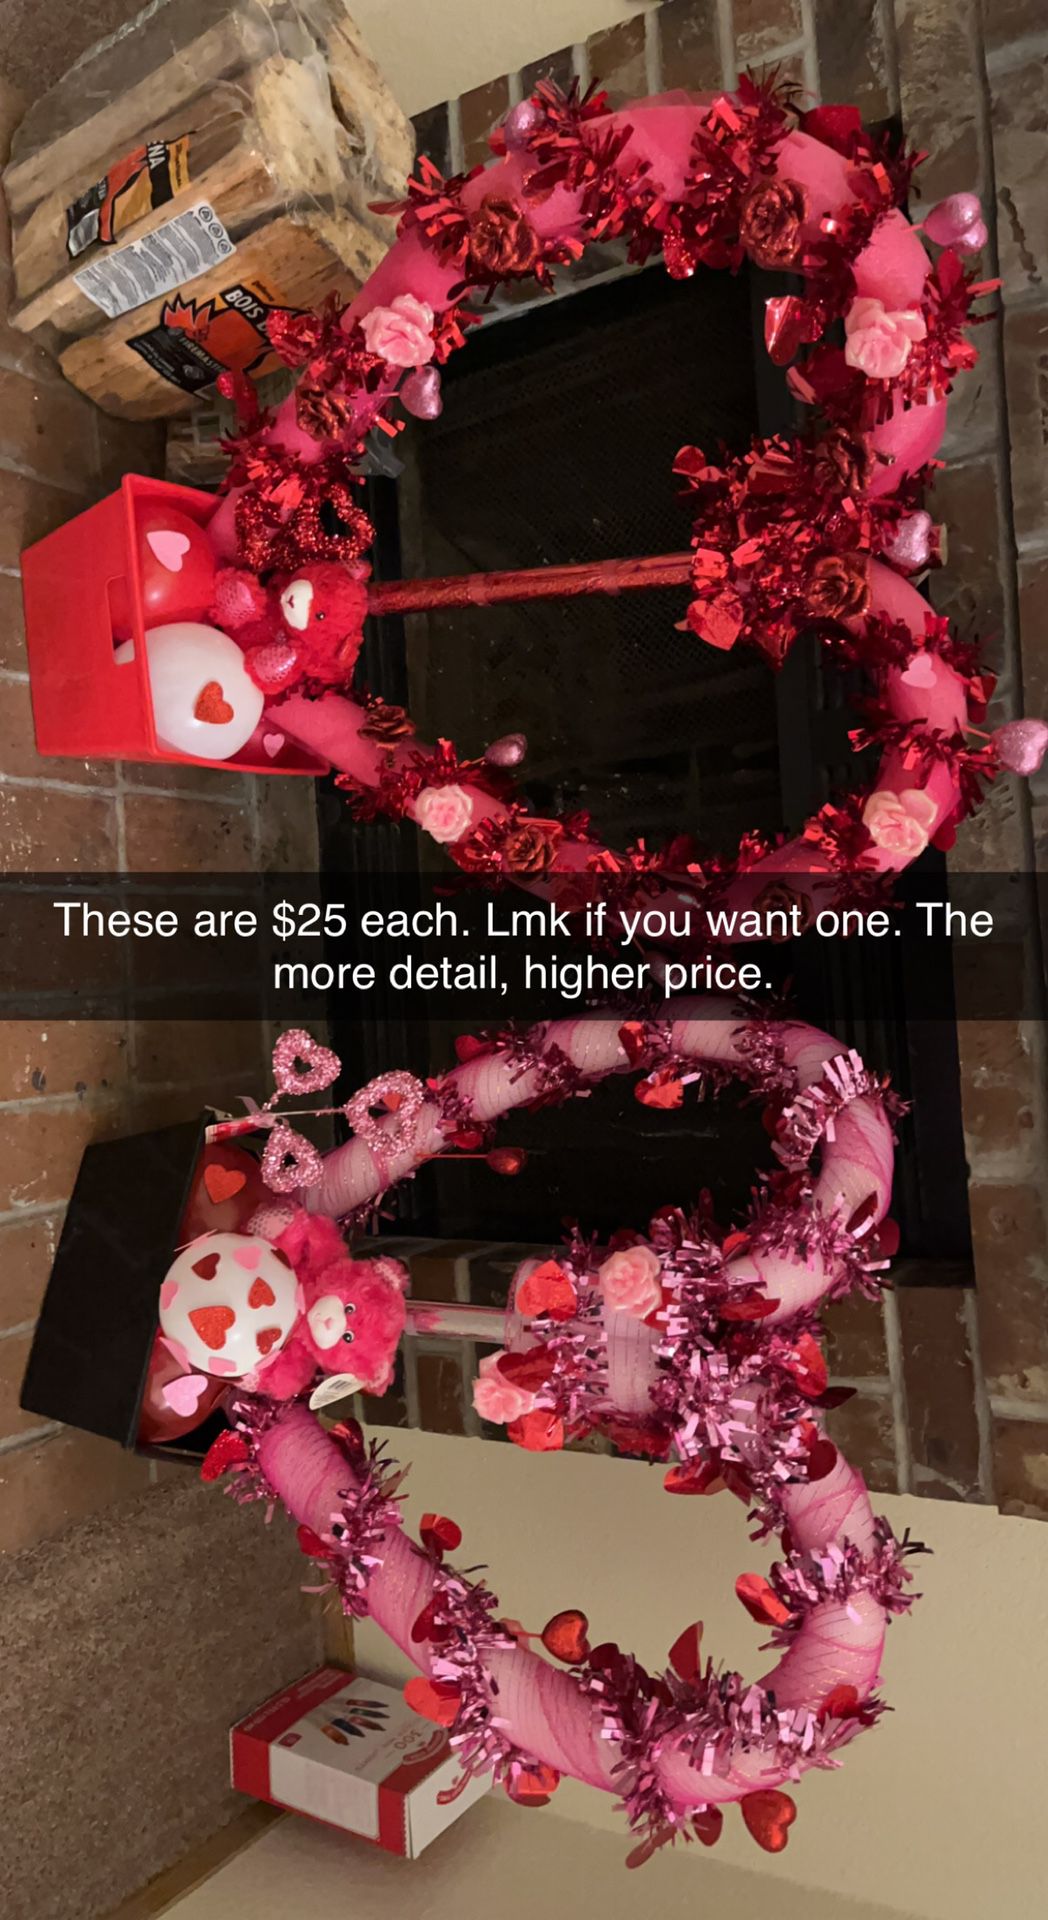 Valentines Day Gifts 